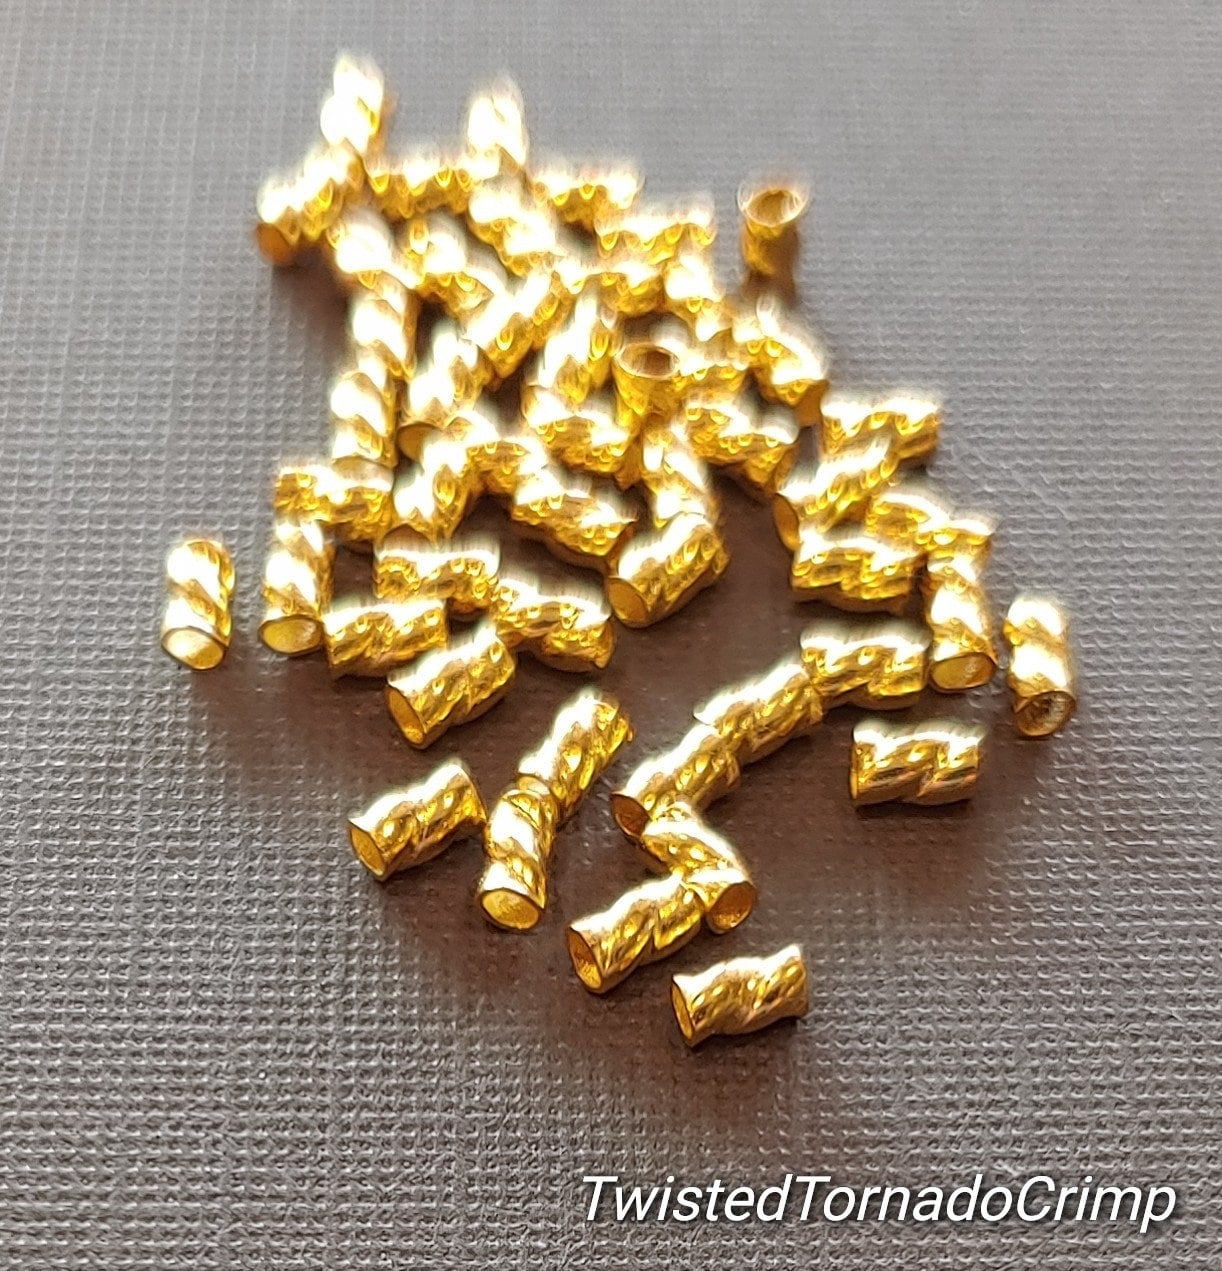 50 piece, 3x3mm Crimp Beads, Gold Crimp Tubes, Large 14kt Gold Filled  Crimping Beads, Jewelry Tubing, Finish Jewelry Ends, Big Crimps